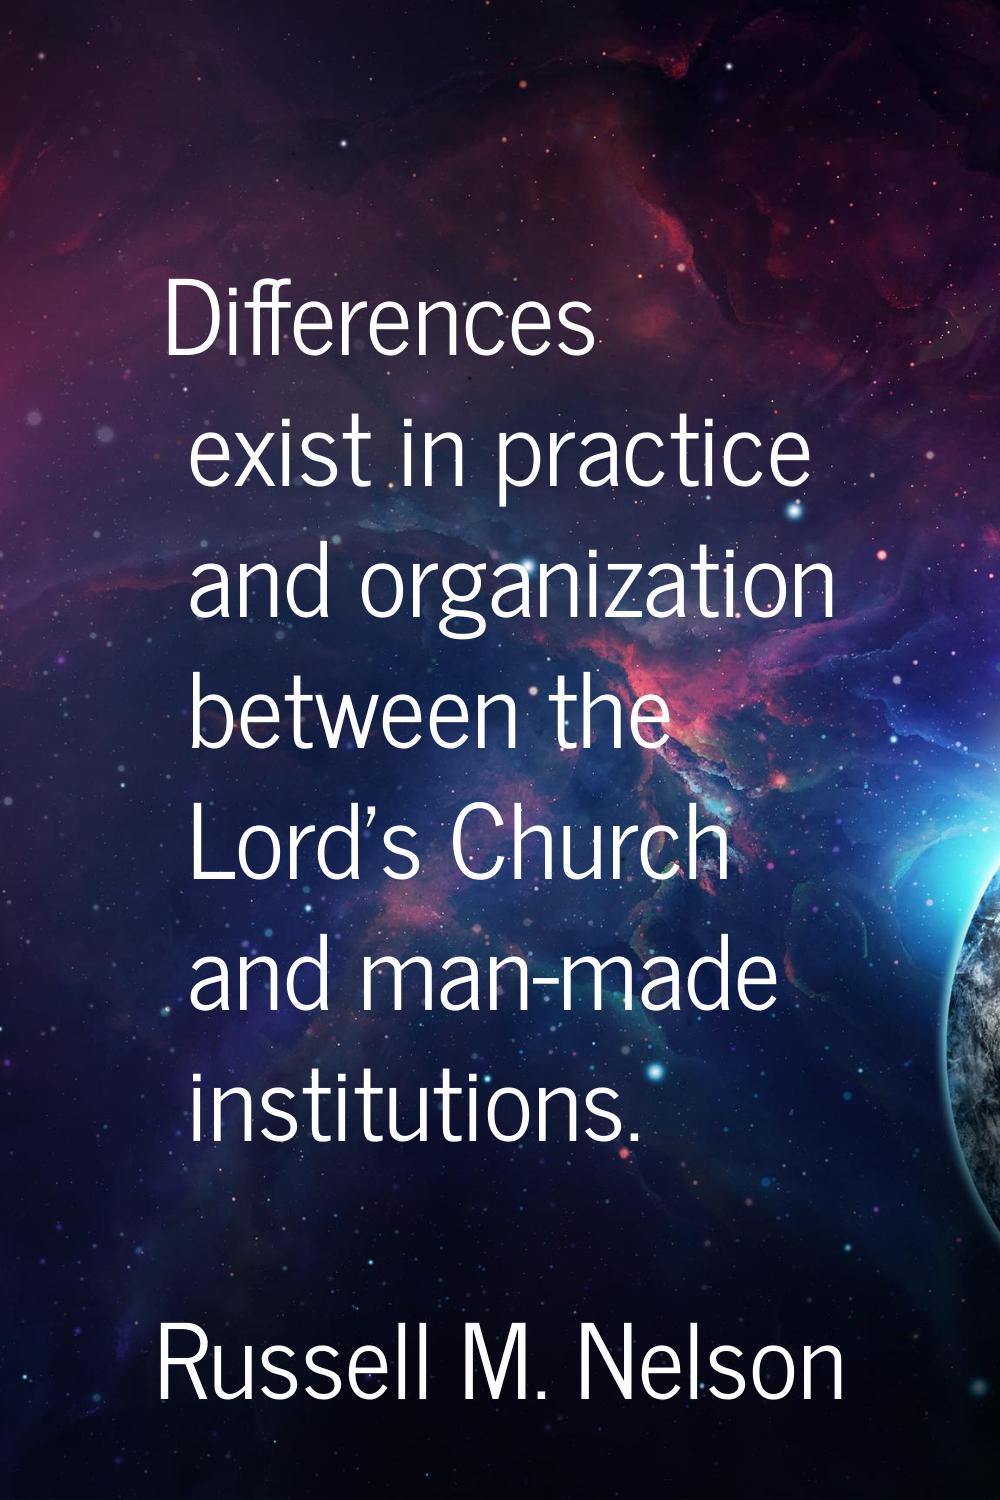 Differences exist in practice and organization between the Lord's Church and man-made institutions.